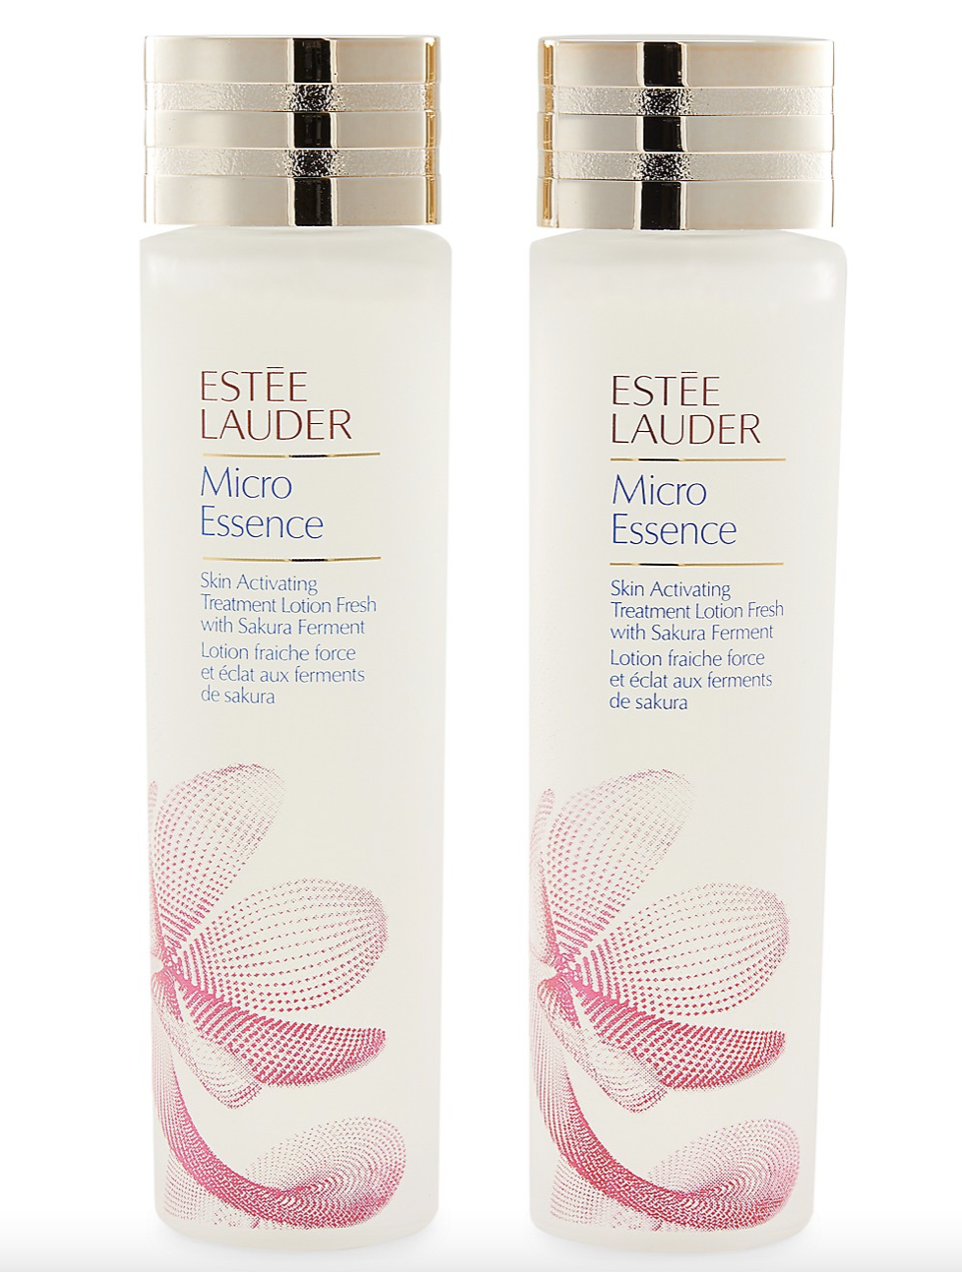 Saks OFF 5TH: Estee Lauder 2-pack Micro Essence for 9.99